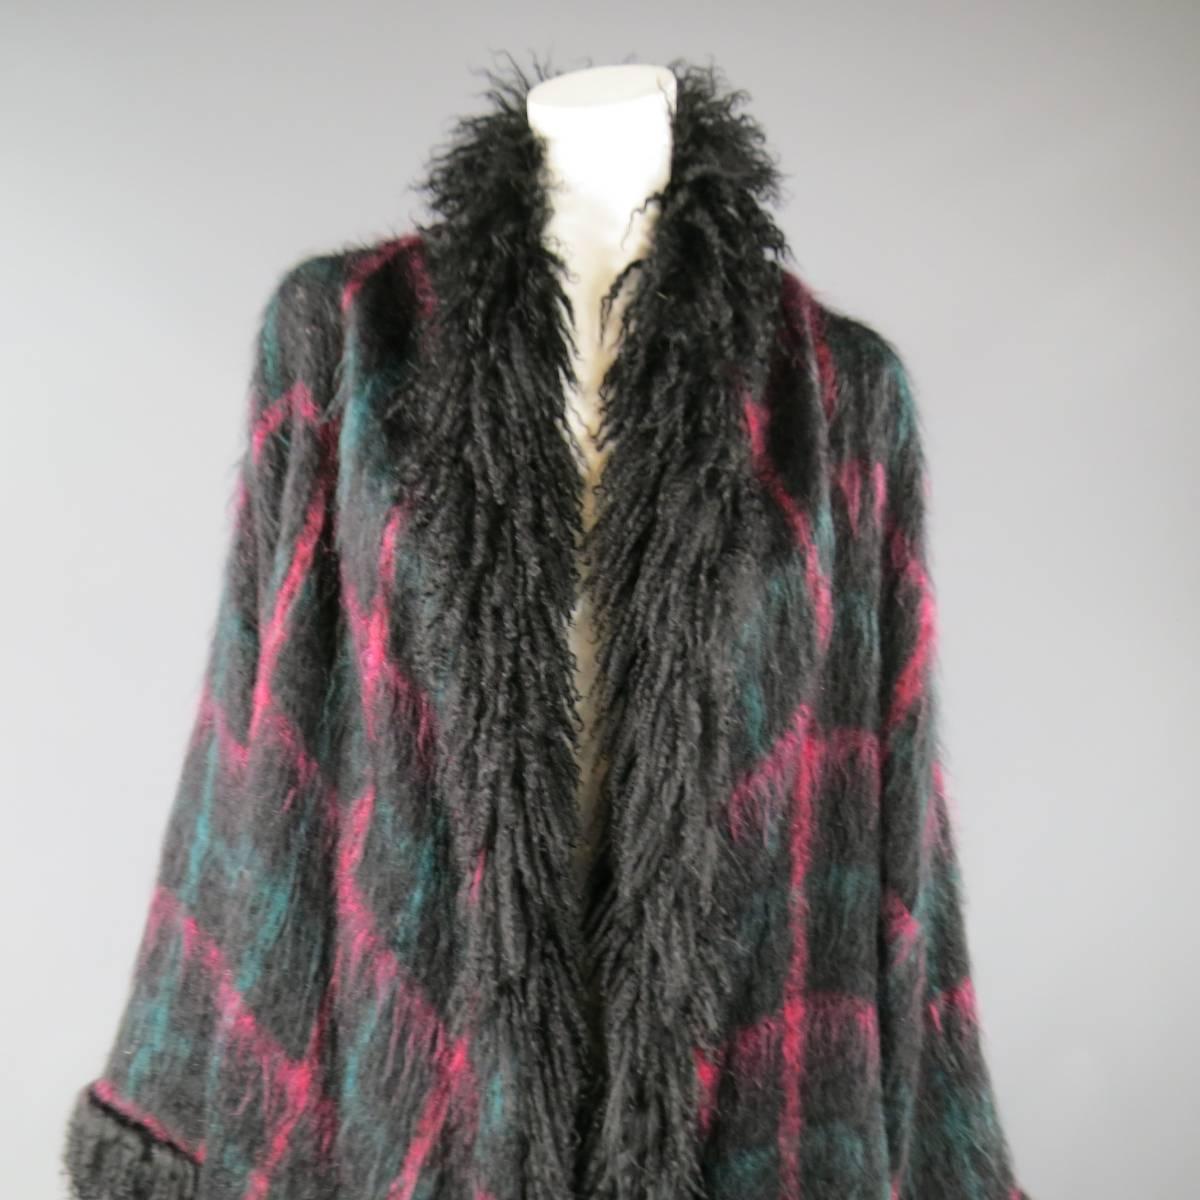 This fabulous JEAN-LOUIS SCHERRER oversized cardigan coat comes in a black mohair knit with pink and teal windowpane plaid print in a draped silhouette with black Mongolian lamb fur trim.
 
Very Good Pre-Owned Condition.
 
Measurements:
